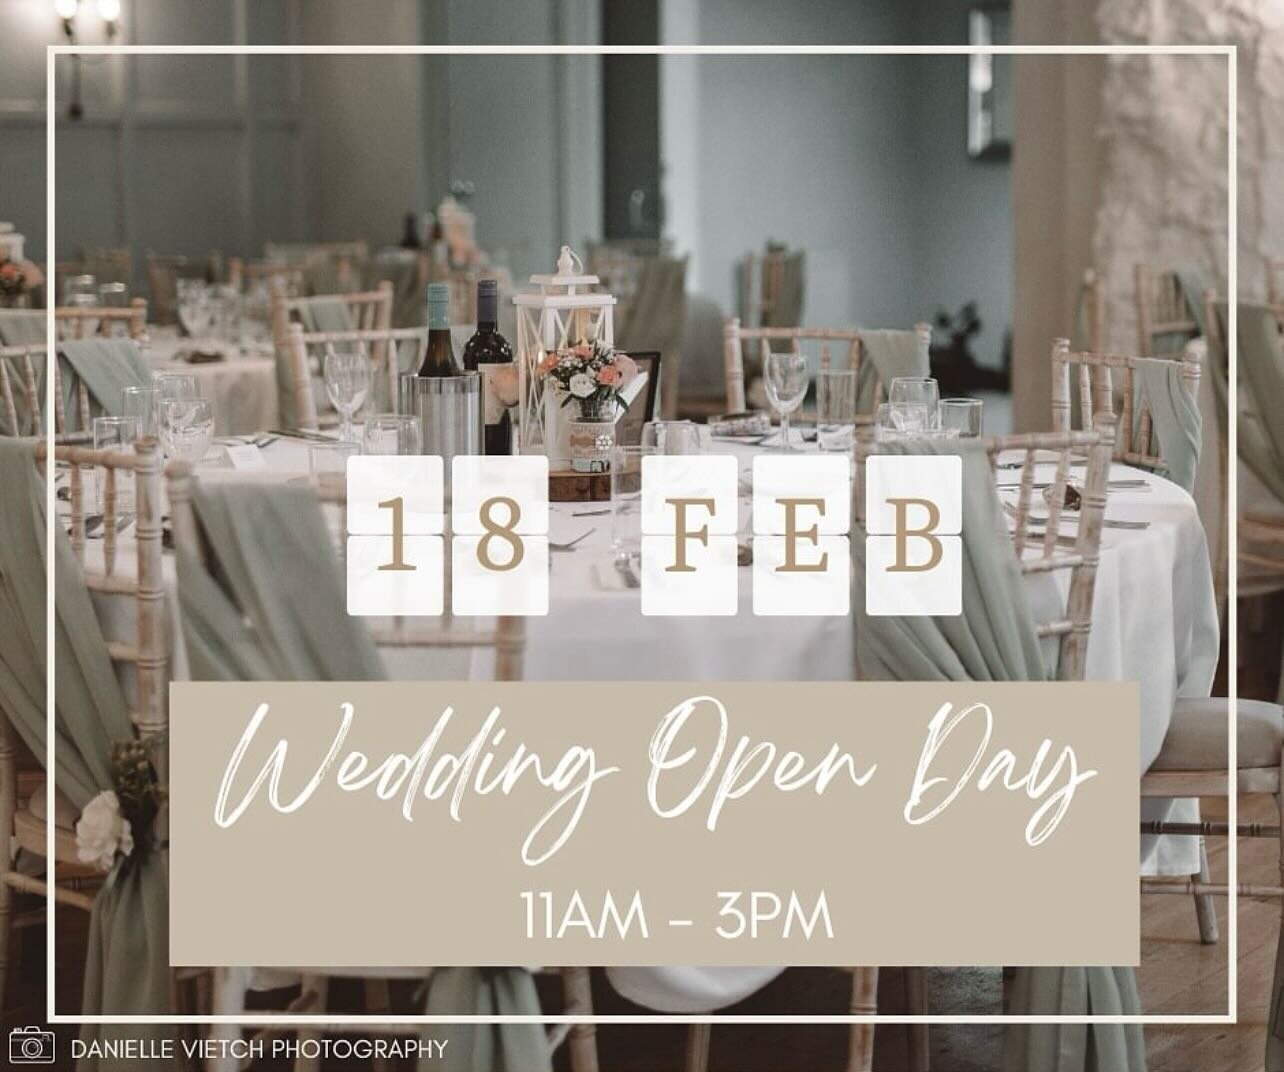 You can find us at one of our favourite venues @bickleymill this Sunday (18th) for their open day! 10am - 3pm. 💍

Alongside some of Devon&rsquo;s very best suppliers: 
@chris.thomas.singer 
@danbraziermagician 
@vintage_camperbooths 
@ninascakeybaki